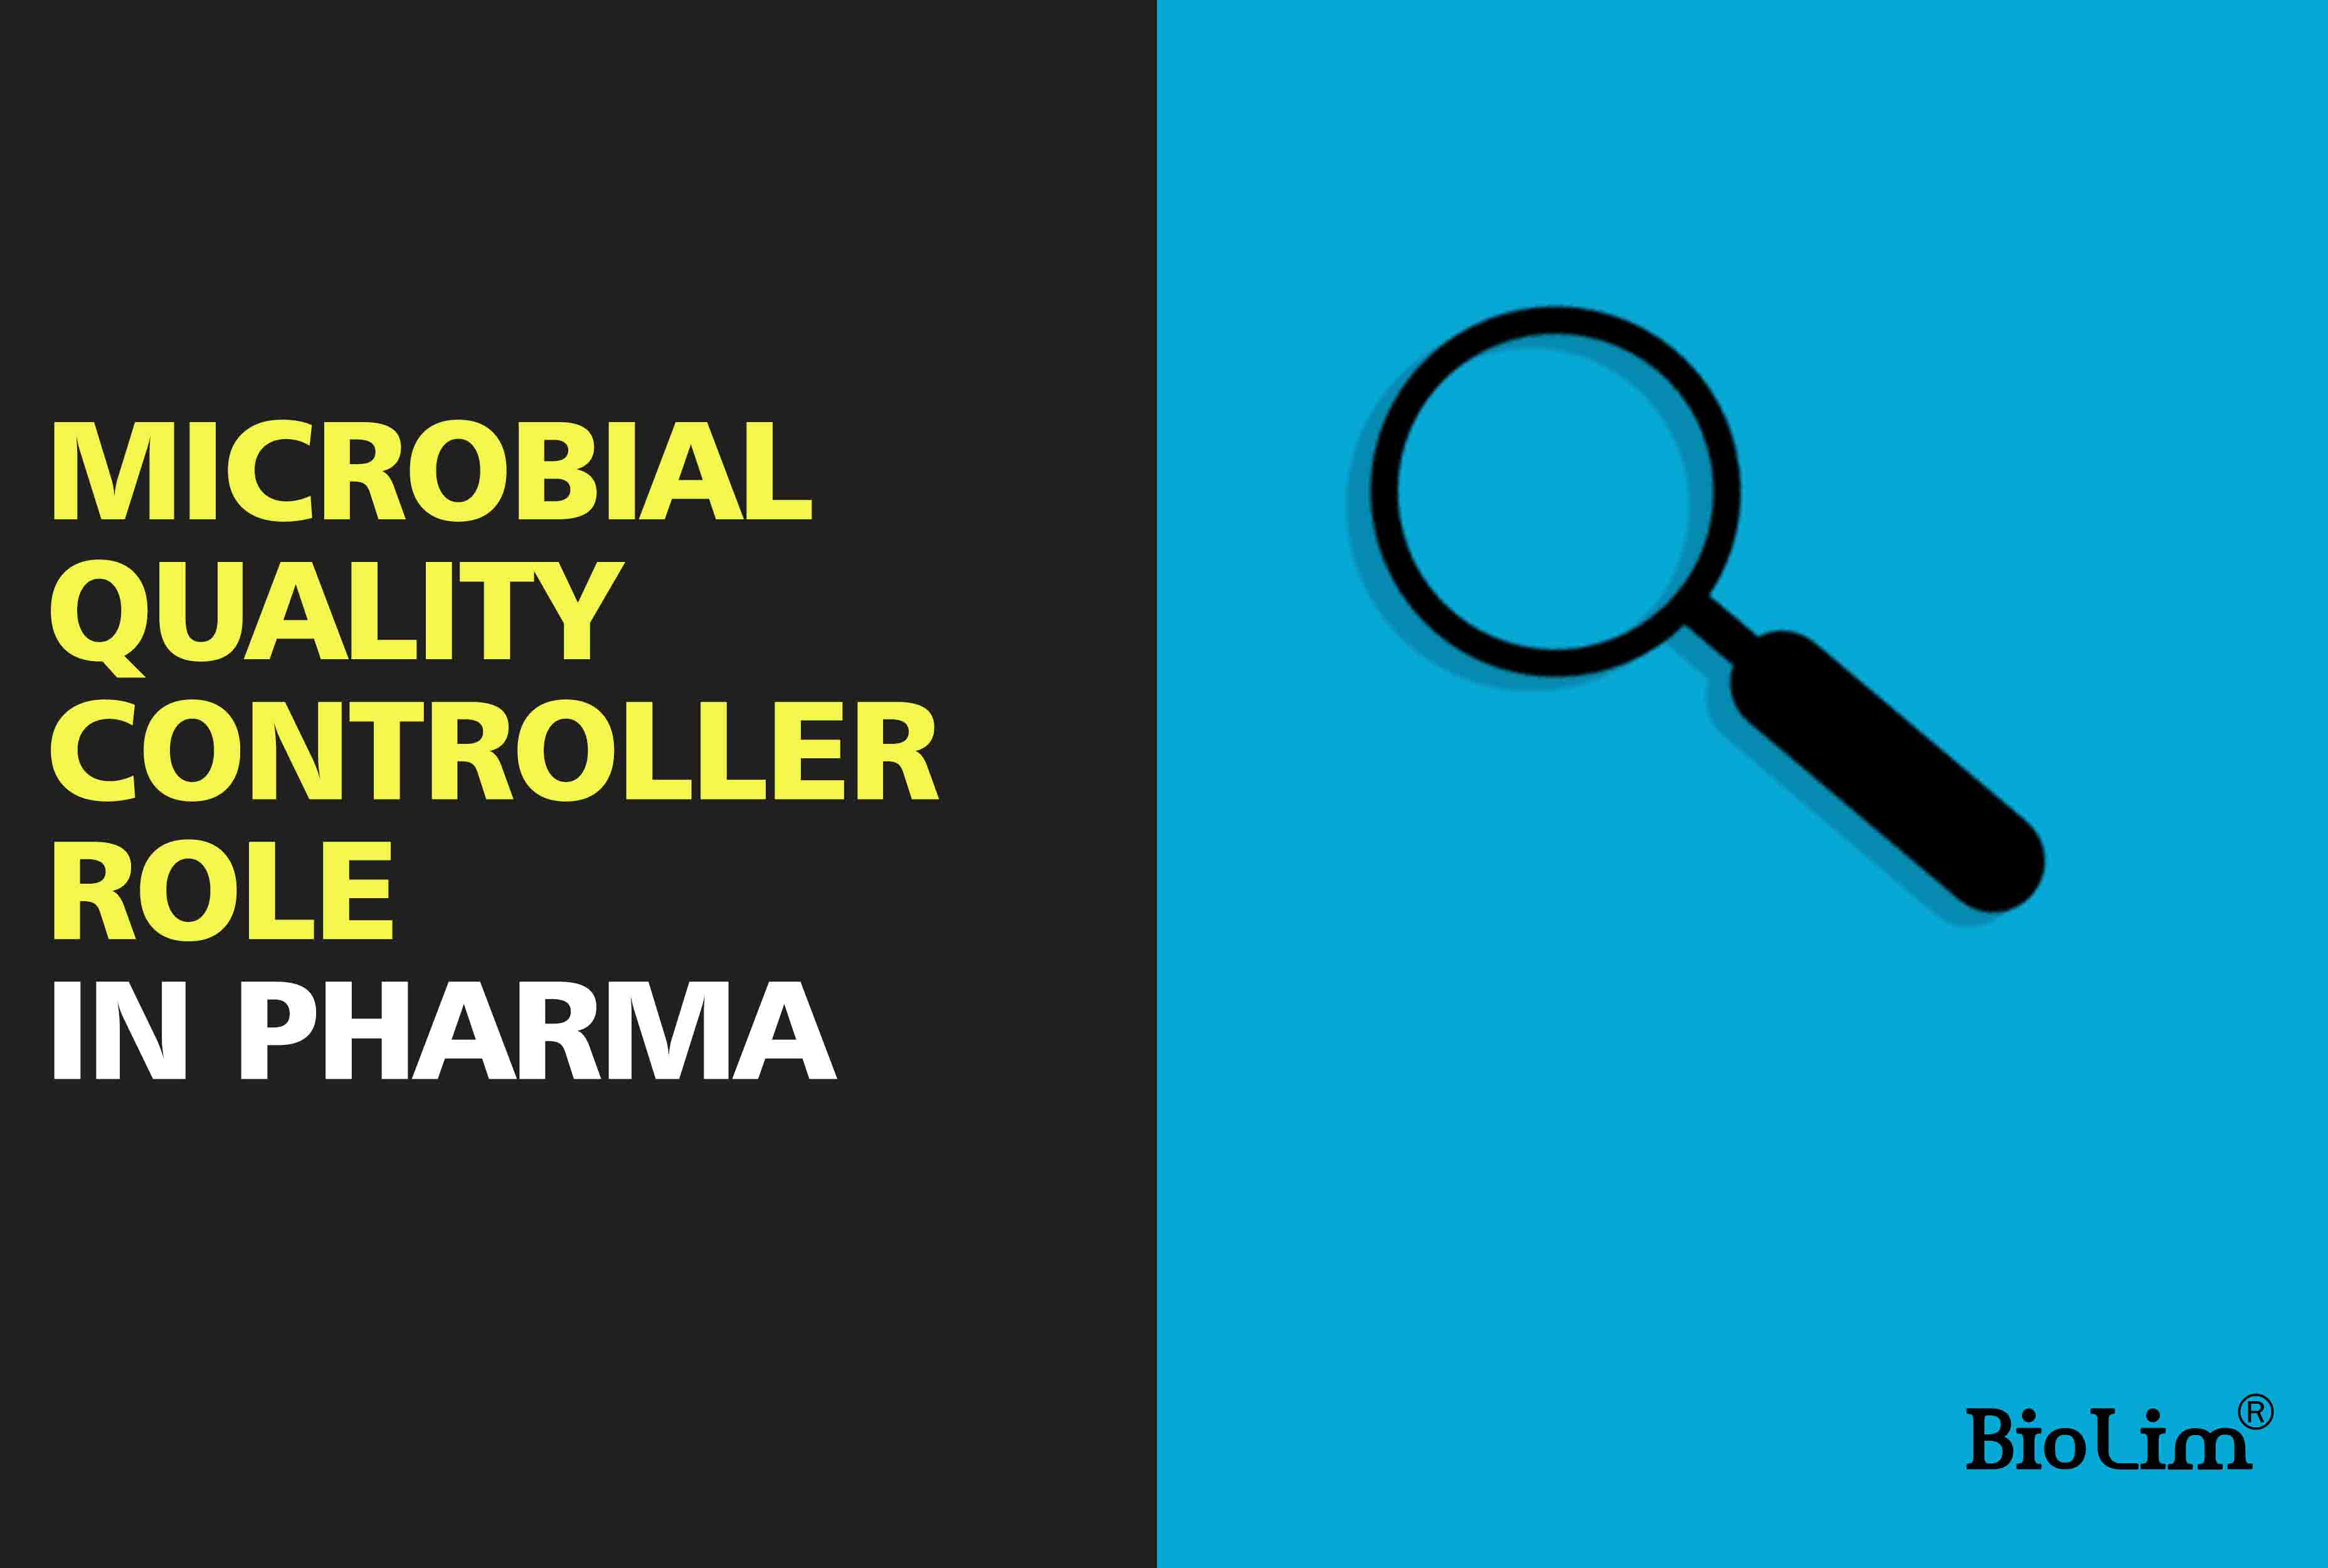 Online internship on microbial quality controller role in pharma